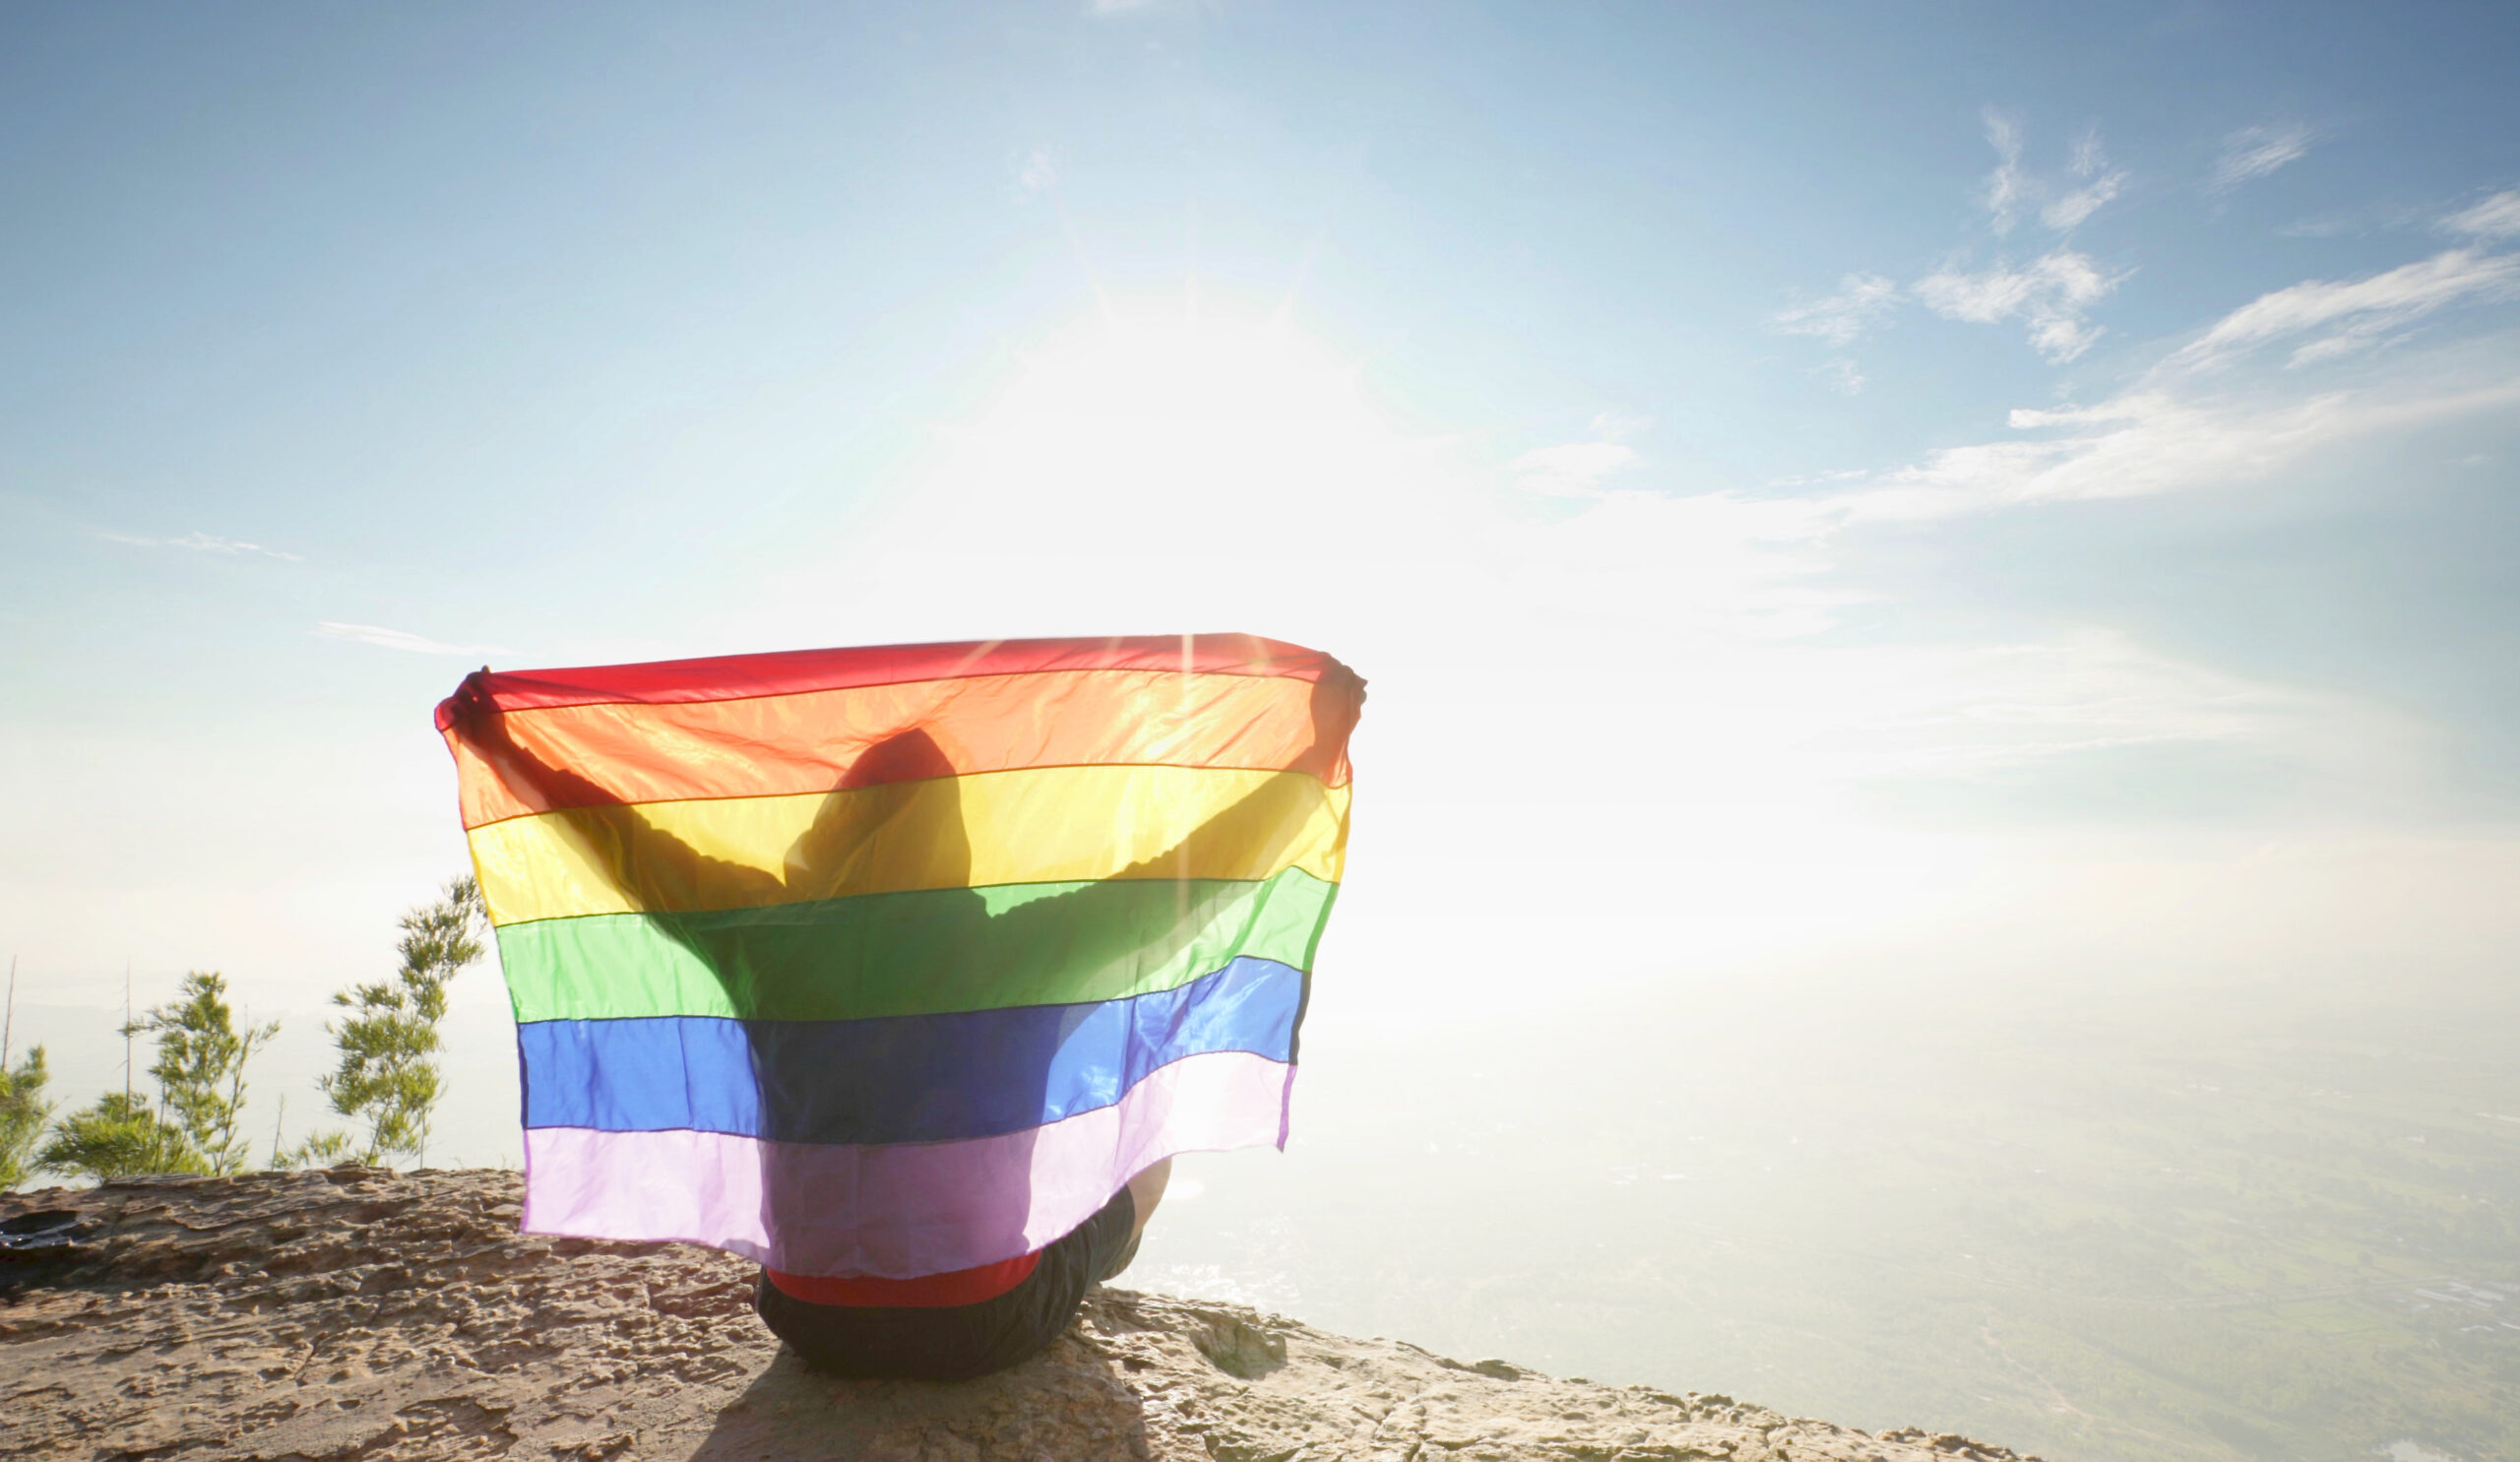 Featured image for “Comparing psychotherapies for gay and bisexual men’s mental health”